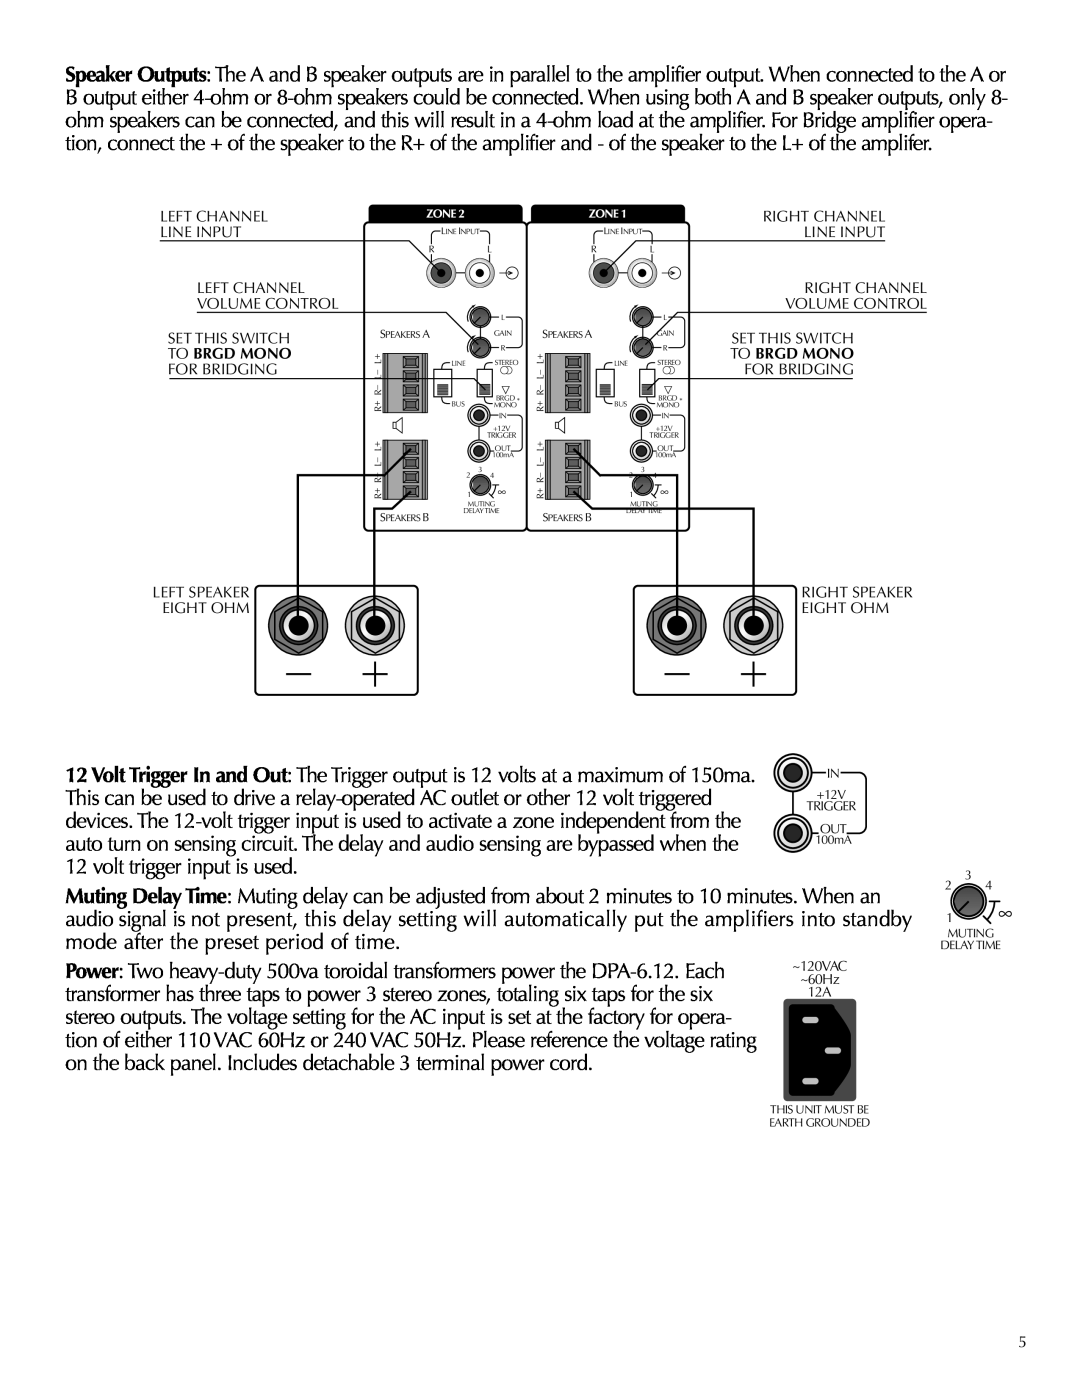 Russound DPA-6.12 instruction manual volt trigger input is used 